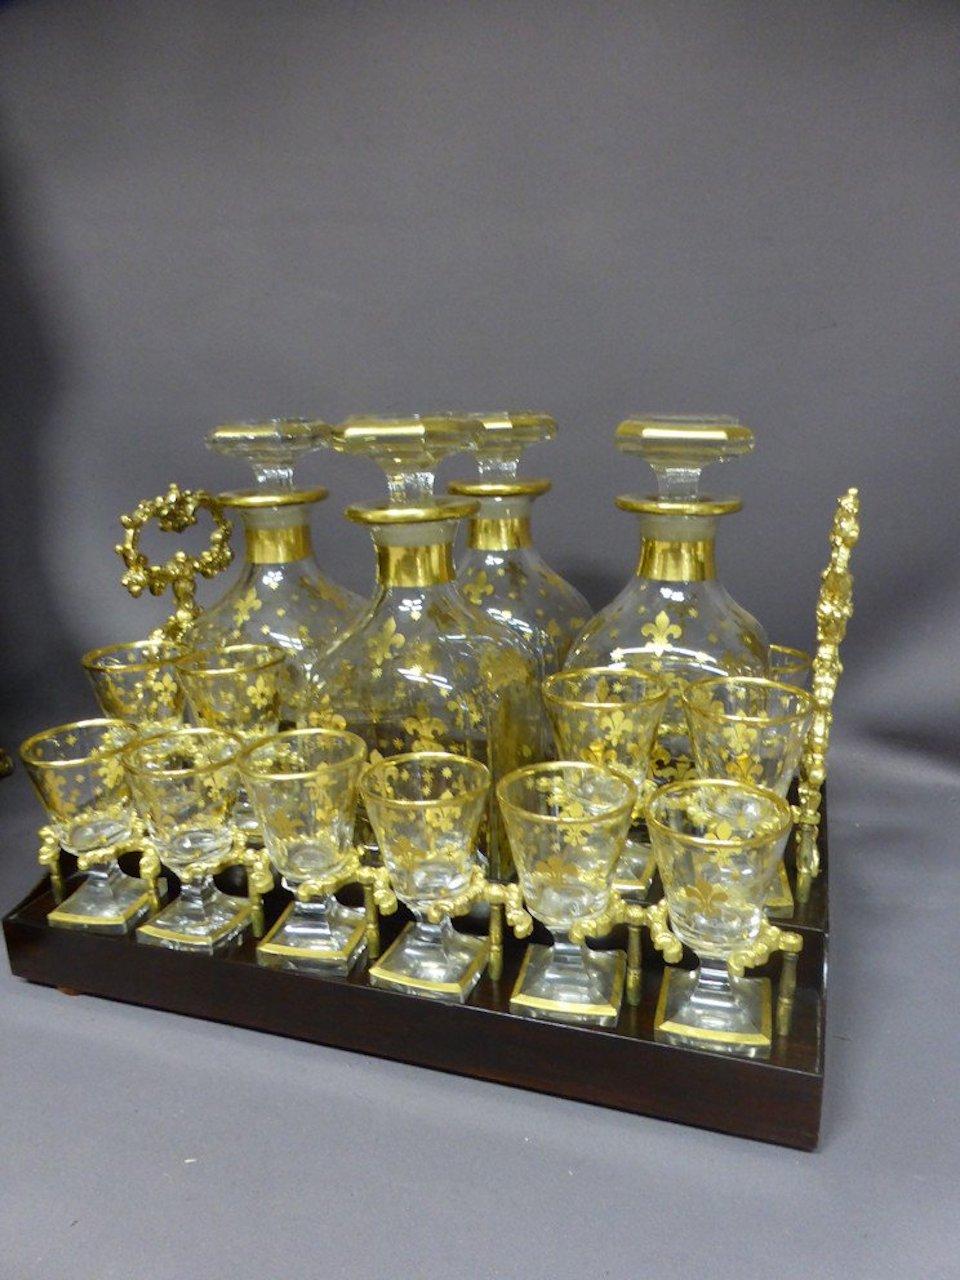 Beautiful liquor cellar in blackened wood from the Napoleon III period including a removable basket with three carafes and twelve matching gilded glasses decorated with fine gold.
The box has a curved lid decorated with a cartouche in its center on